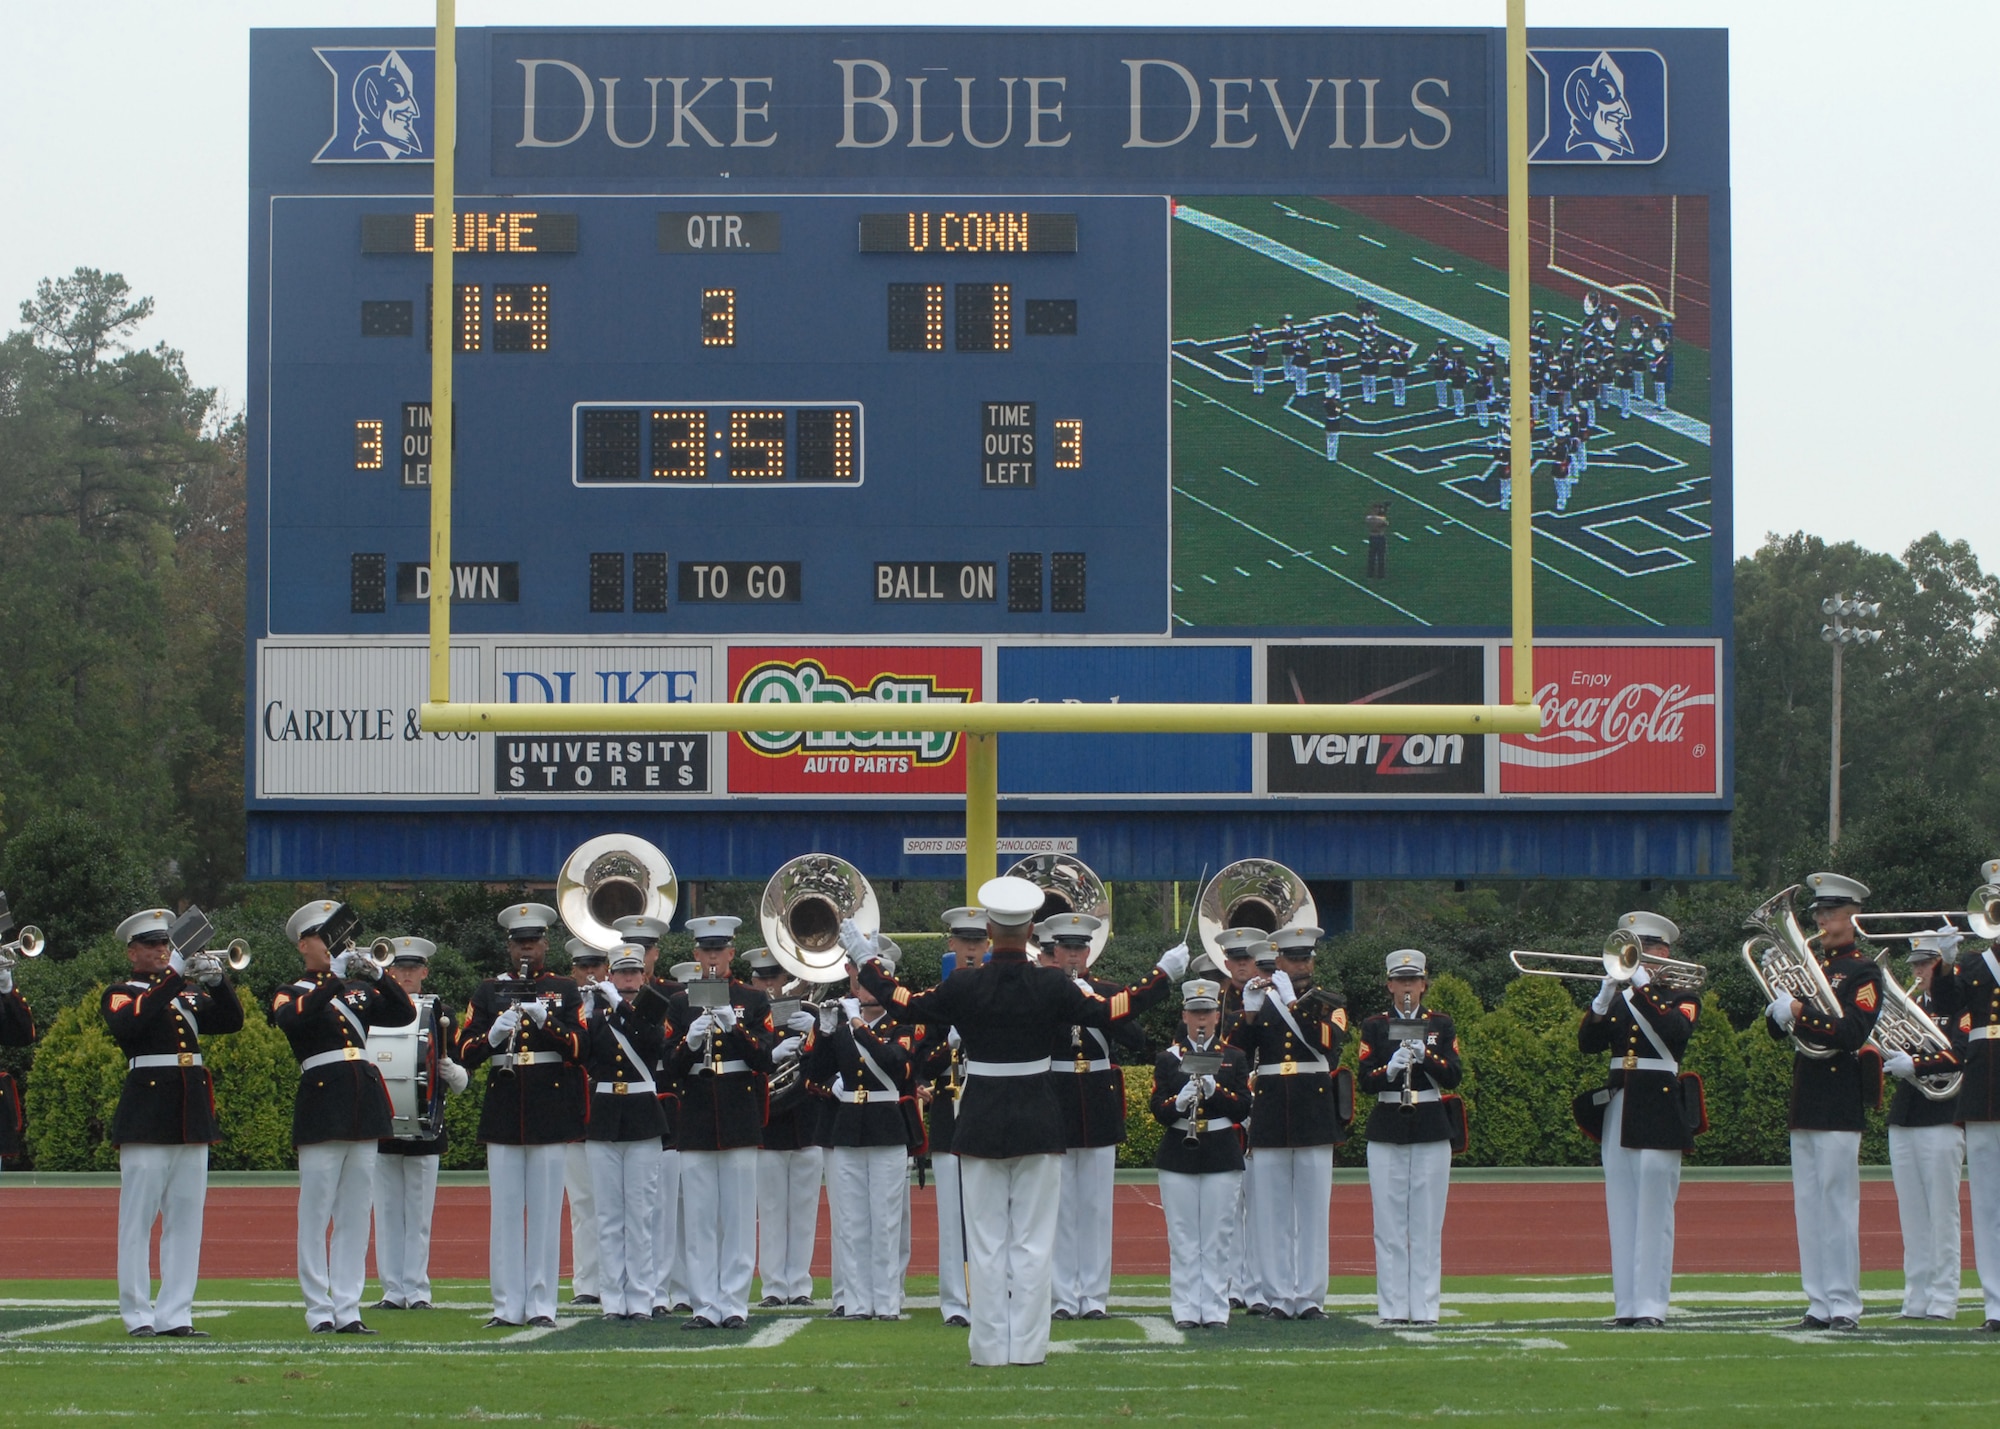 The Marine Band from Marine Corps Recruit Depot Parris Island, S.C. perform during the half time show at the Duke Blue Devils vs Conneticut Huskies college football season opener as part of the Military Appreciation Game Sept. 1 at Wallace Wade Stadium, Durham, N.C. The Marine Band also played the National Anthem before the start of the game. (U.S. Air Force photo/Staff Sgt. Jon LaDue)